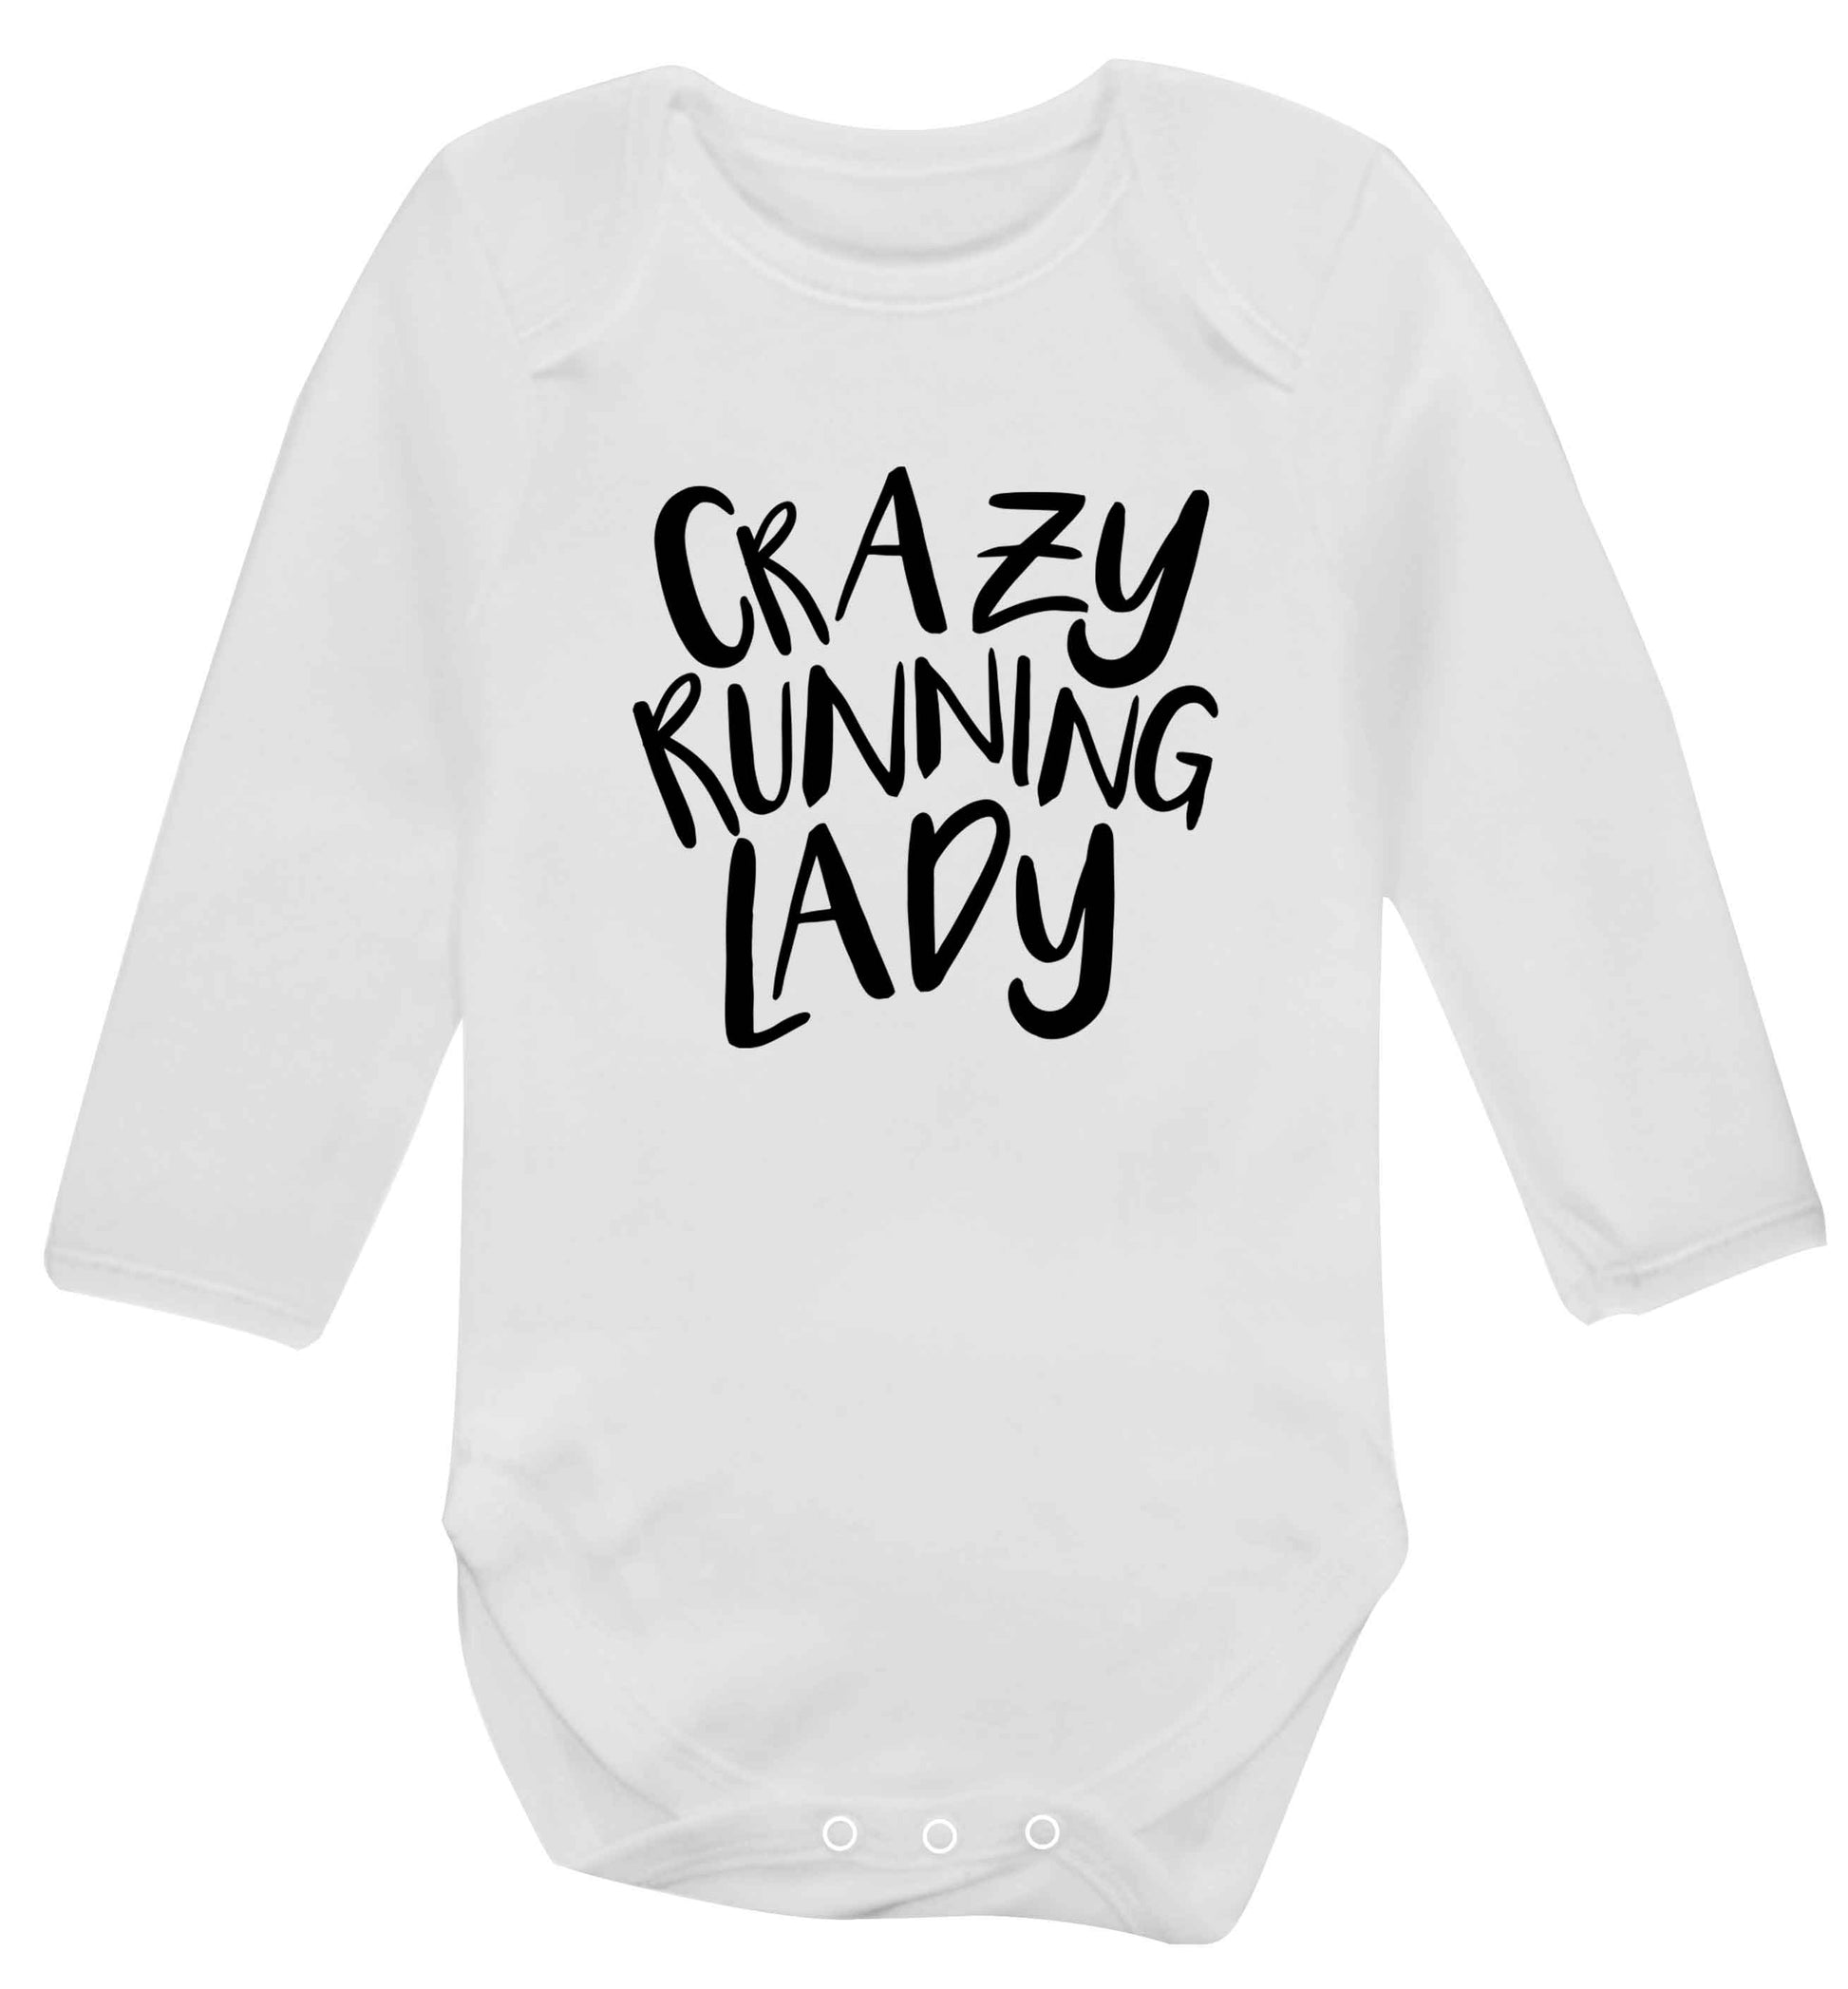 Crazy running lady baby vest long sleeved white 6-12 months